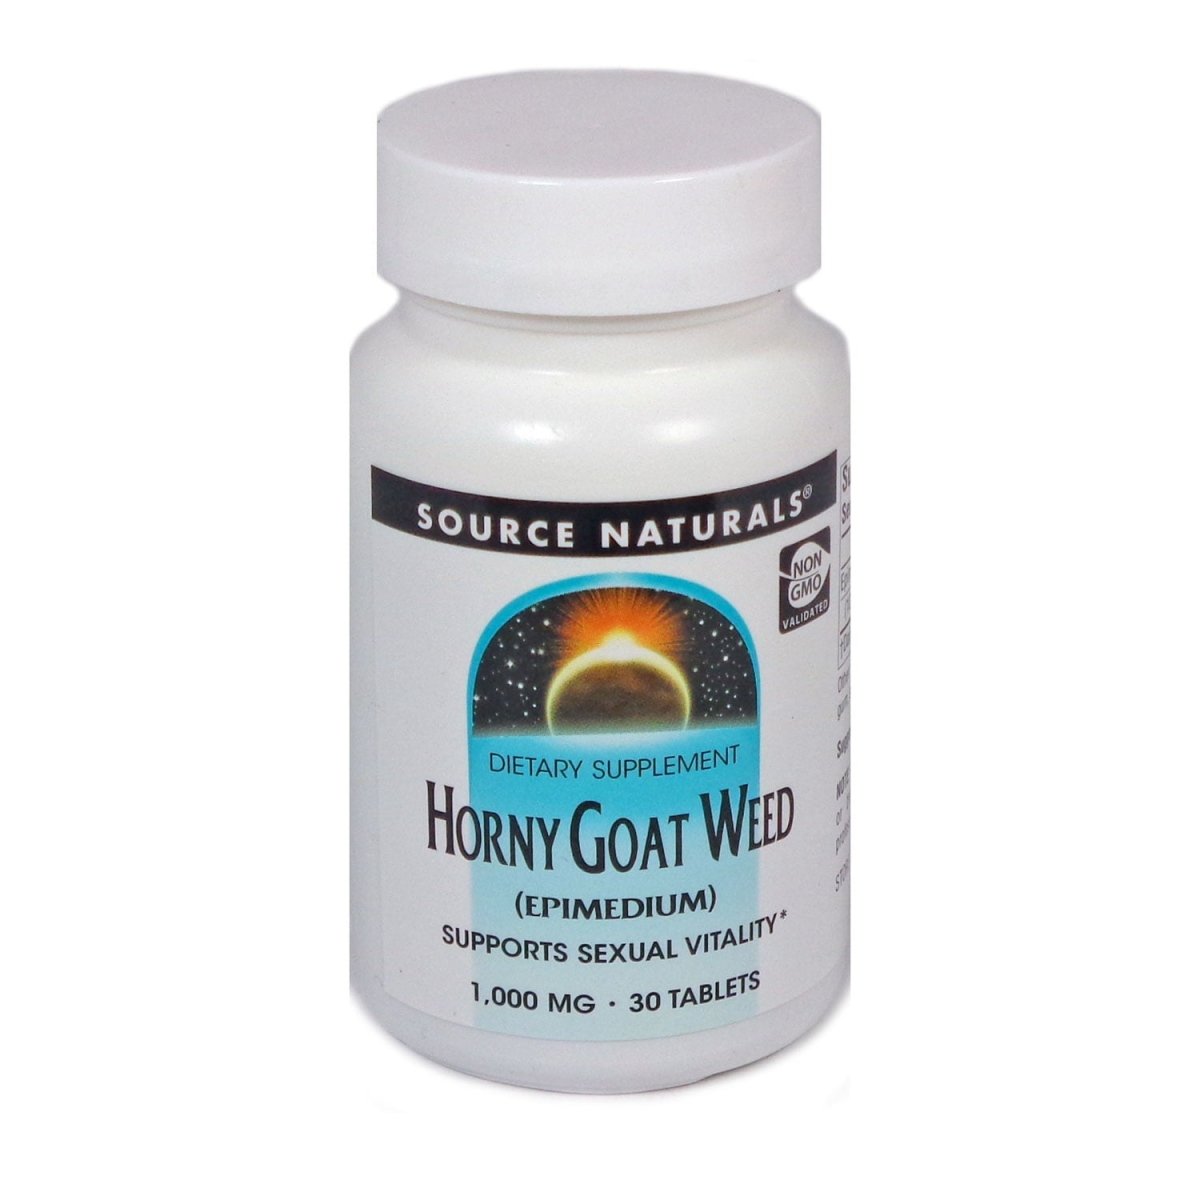 Horny Goat Weed - 30 Tablets - 1000 mg